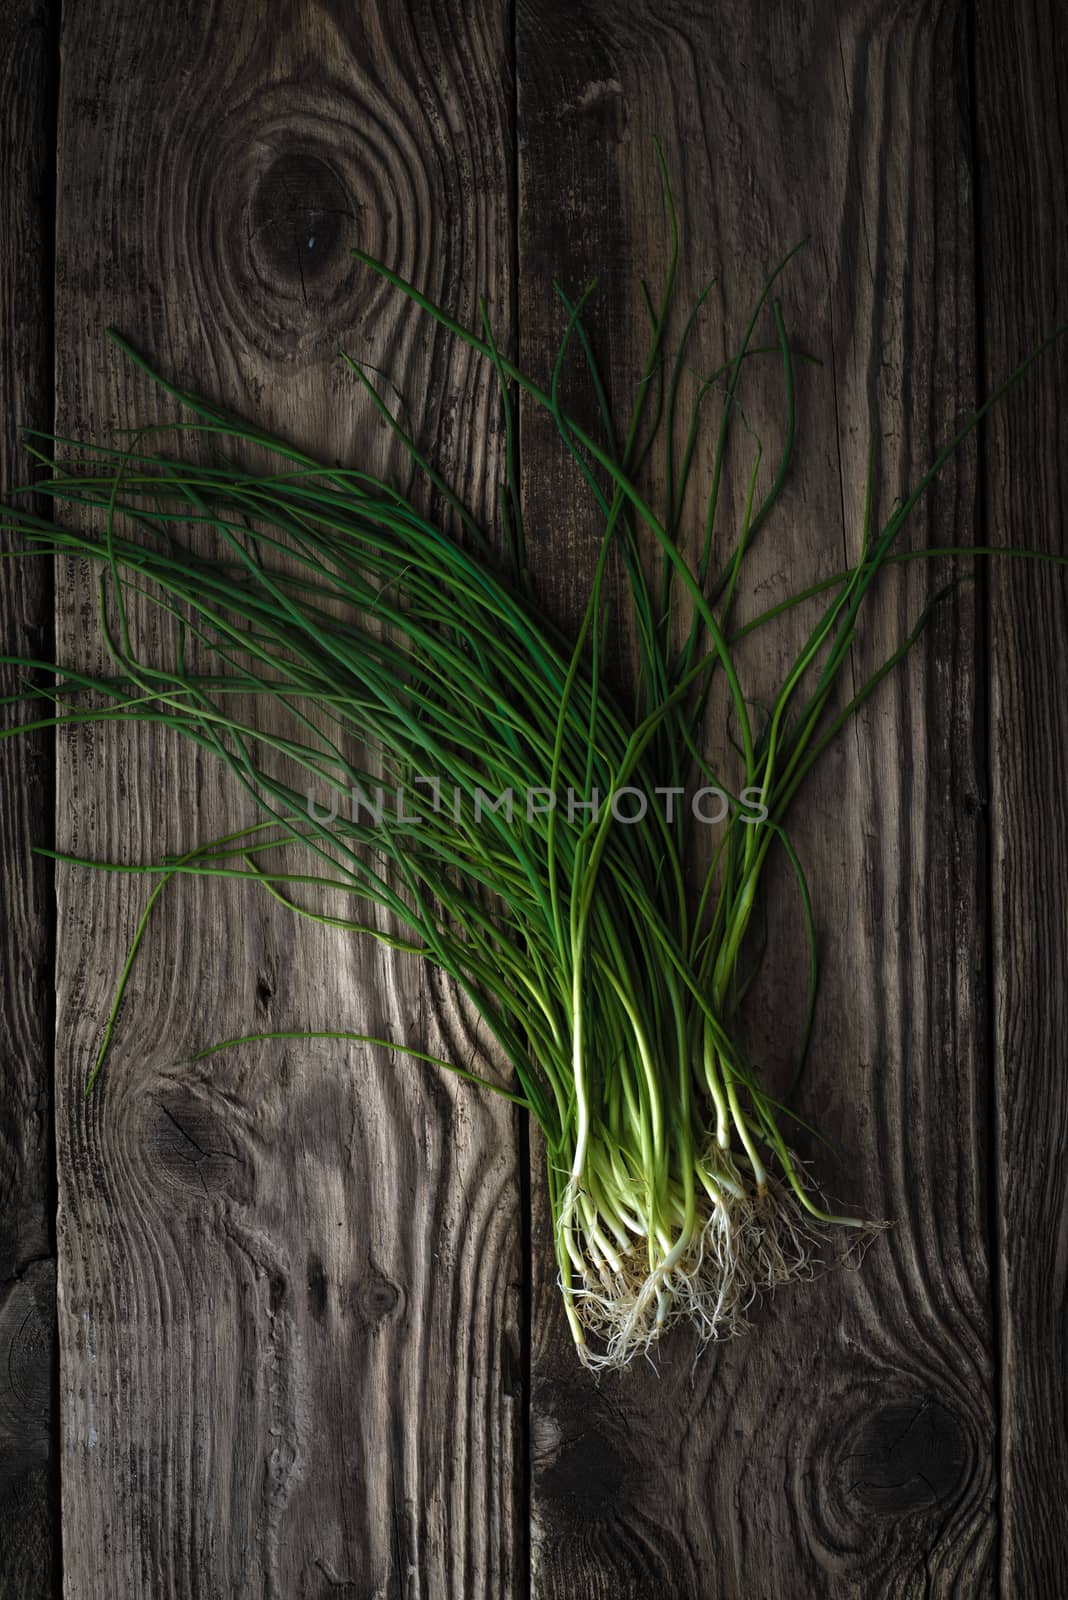 Stalks of green onions on a wooden table vertical